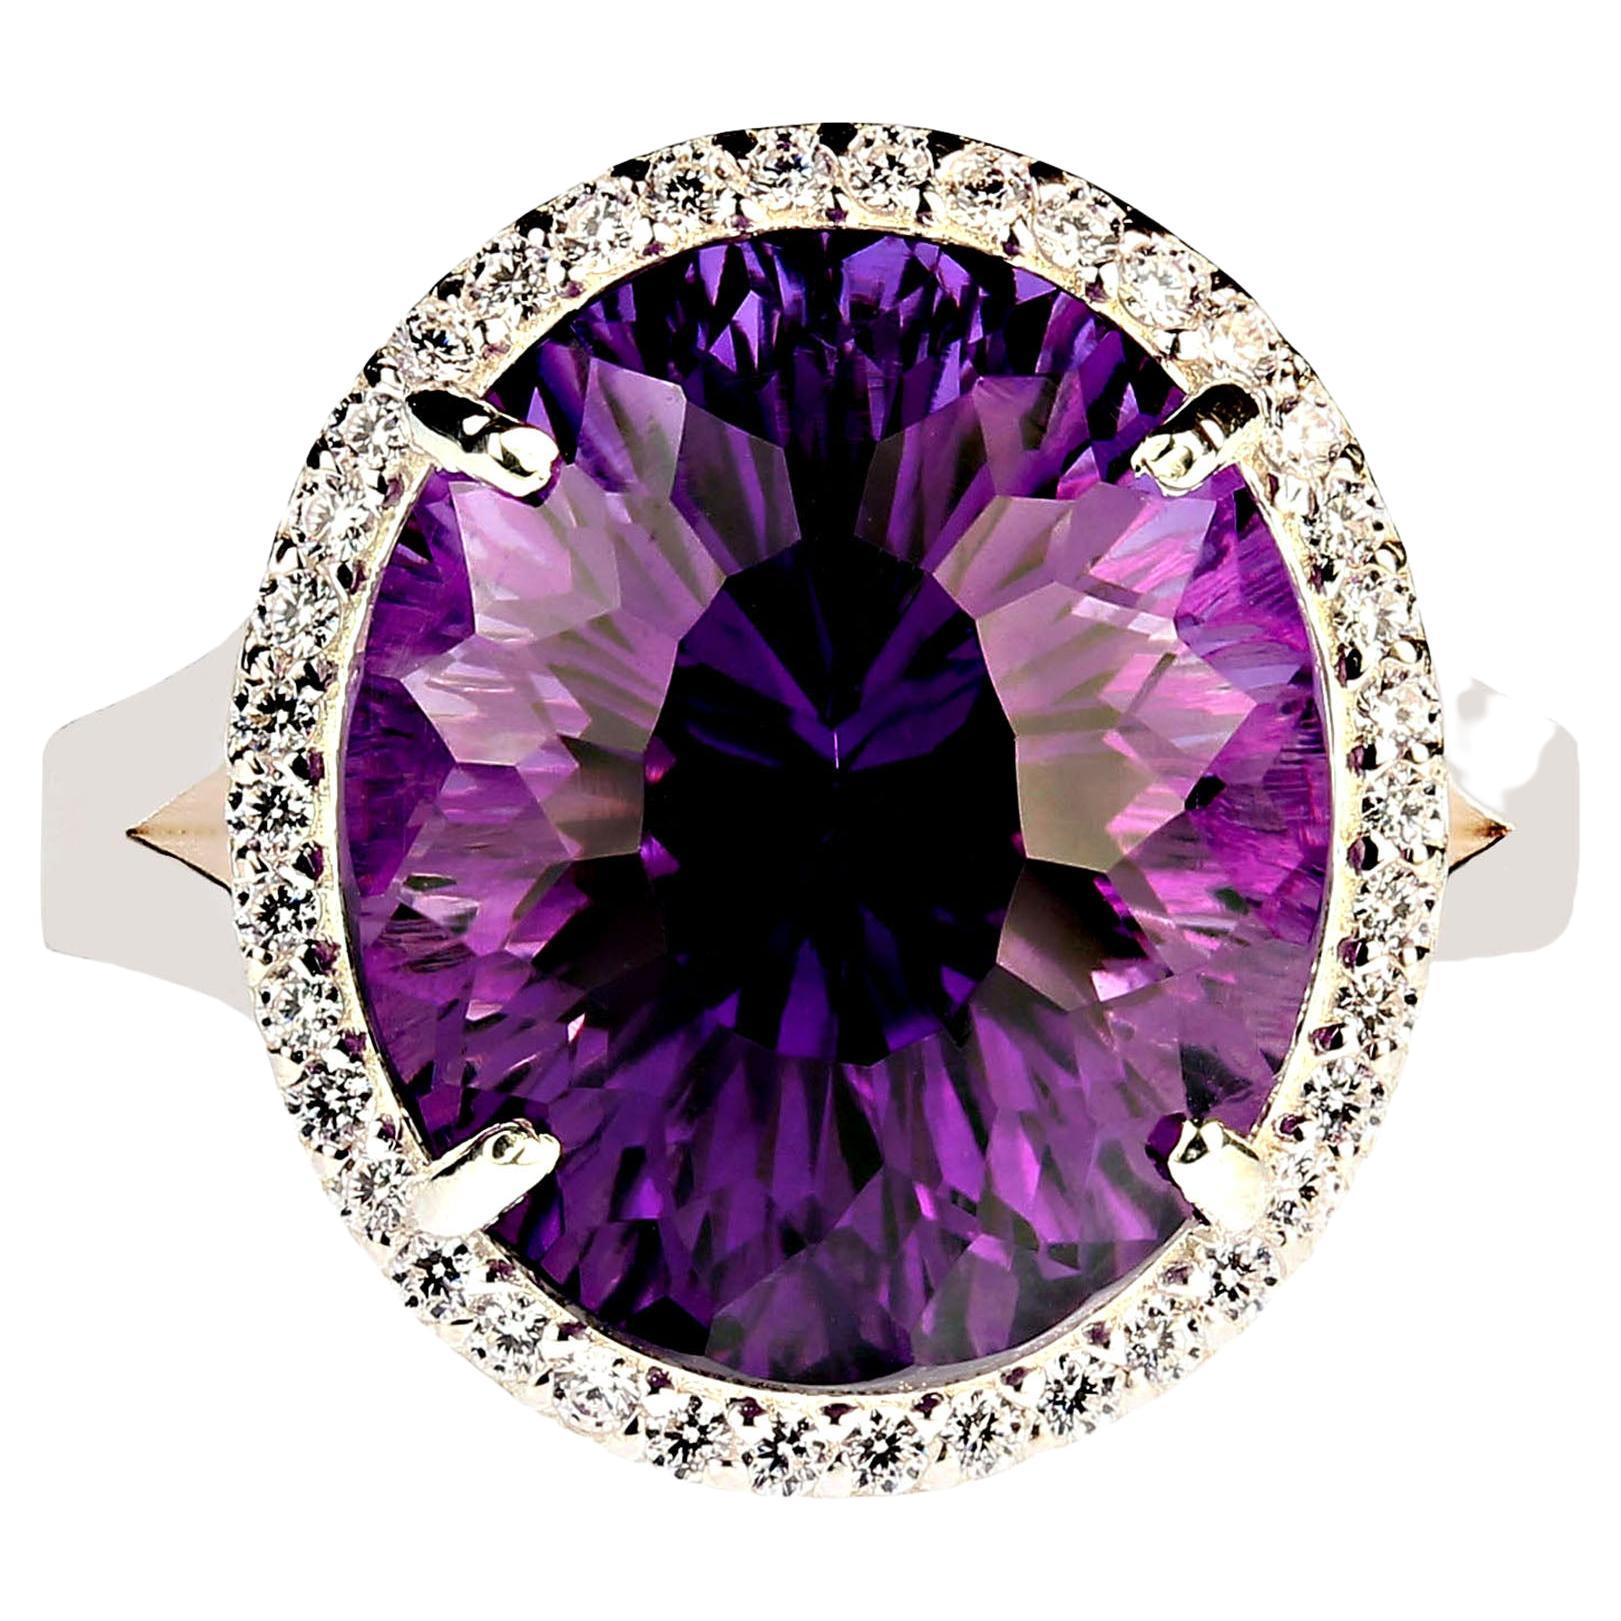 Elegant Evening Cocktail Ring of oval Amethyst, 12.40ct, surrounded by sparkling genuine zircons, 0.57ct.  This unique amethyst is a special cut with extra sparkle and flashes of pink in the purple.  The setting is sterling silver featuring a lovely